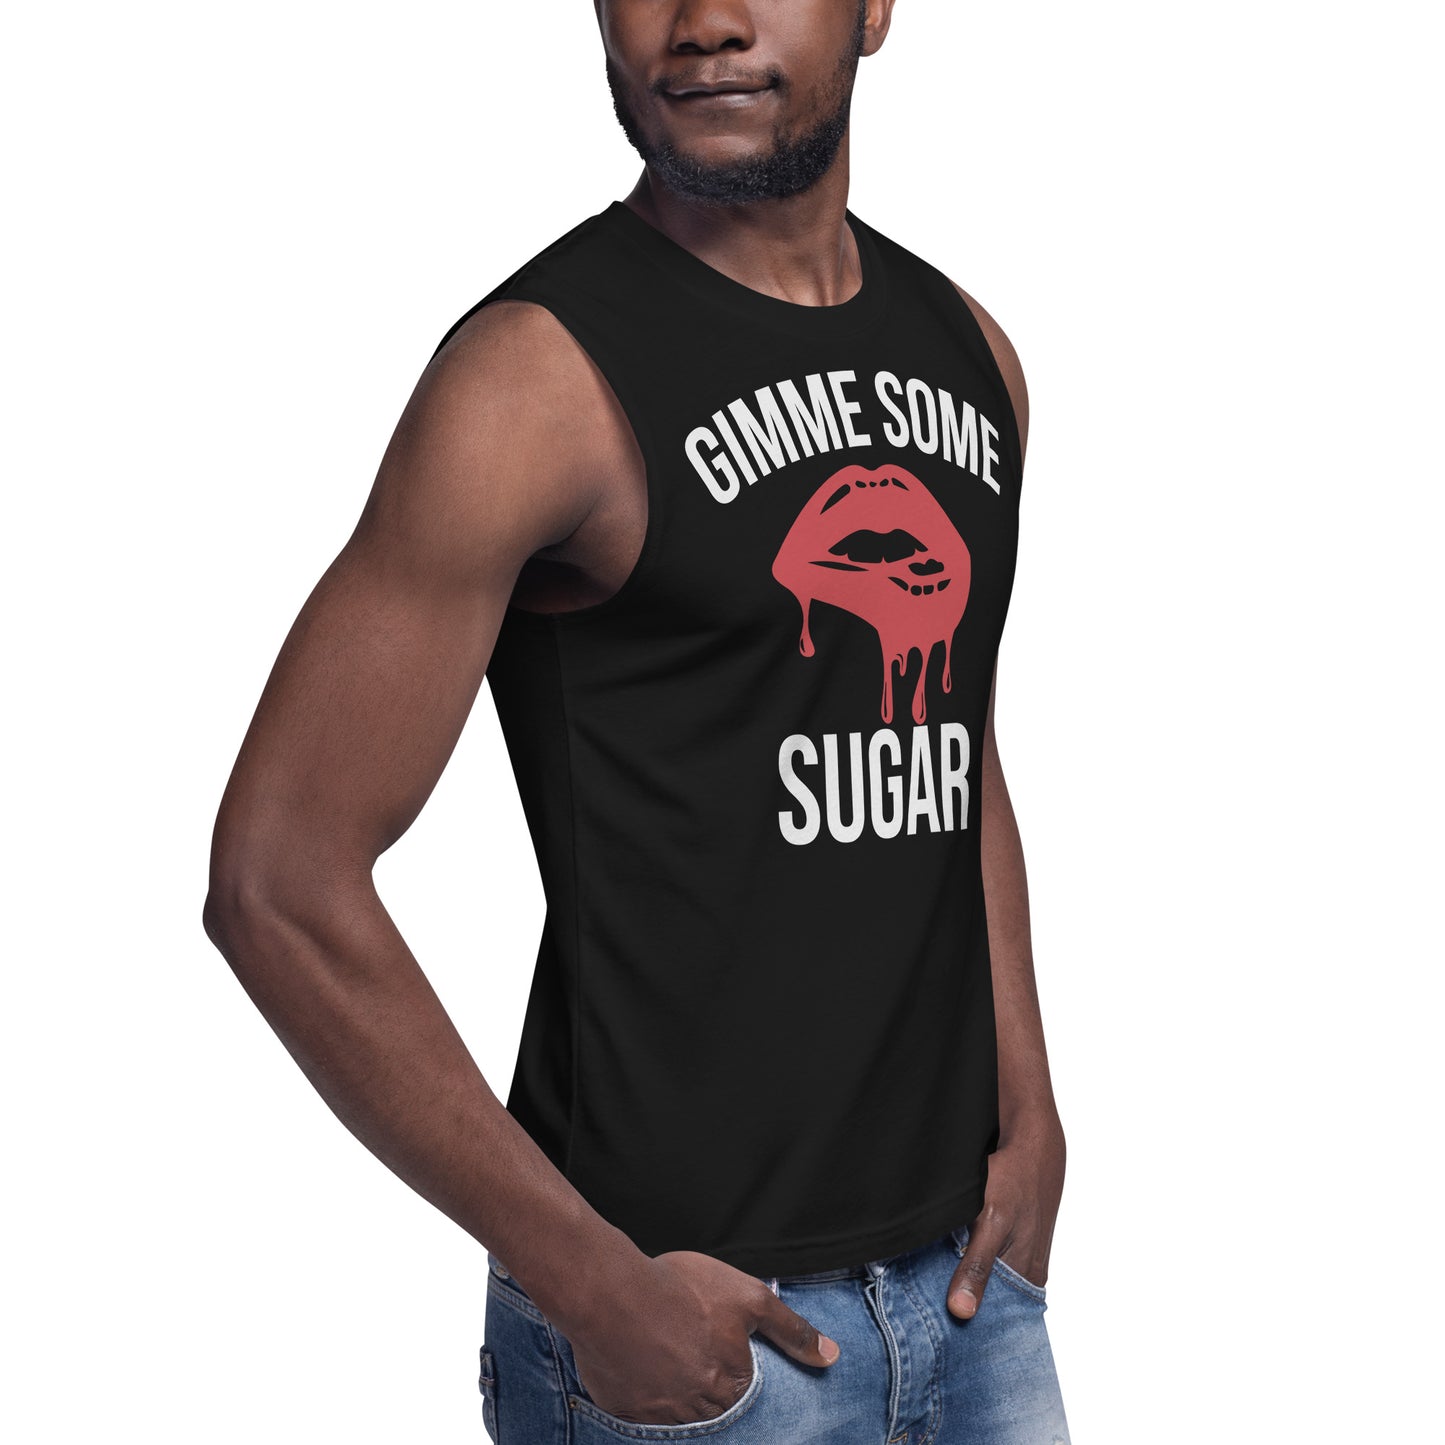 Gimme Some Sugar / Unisex Muscle Shirt